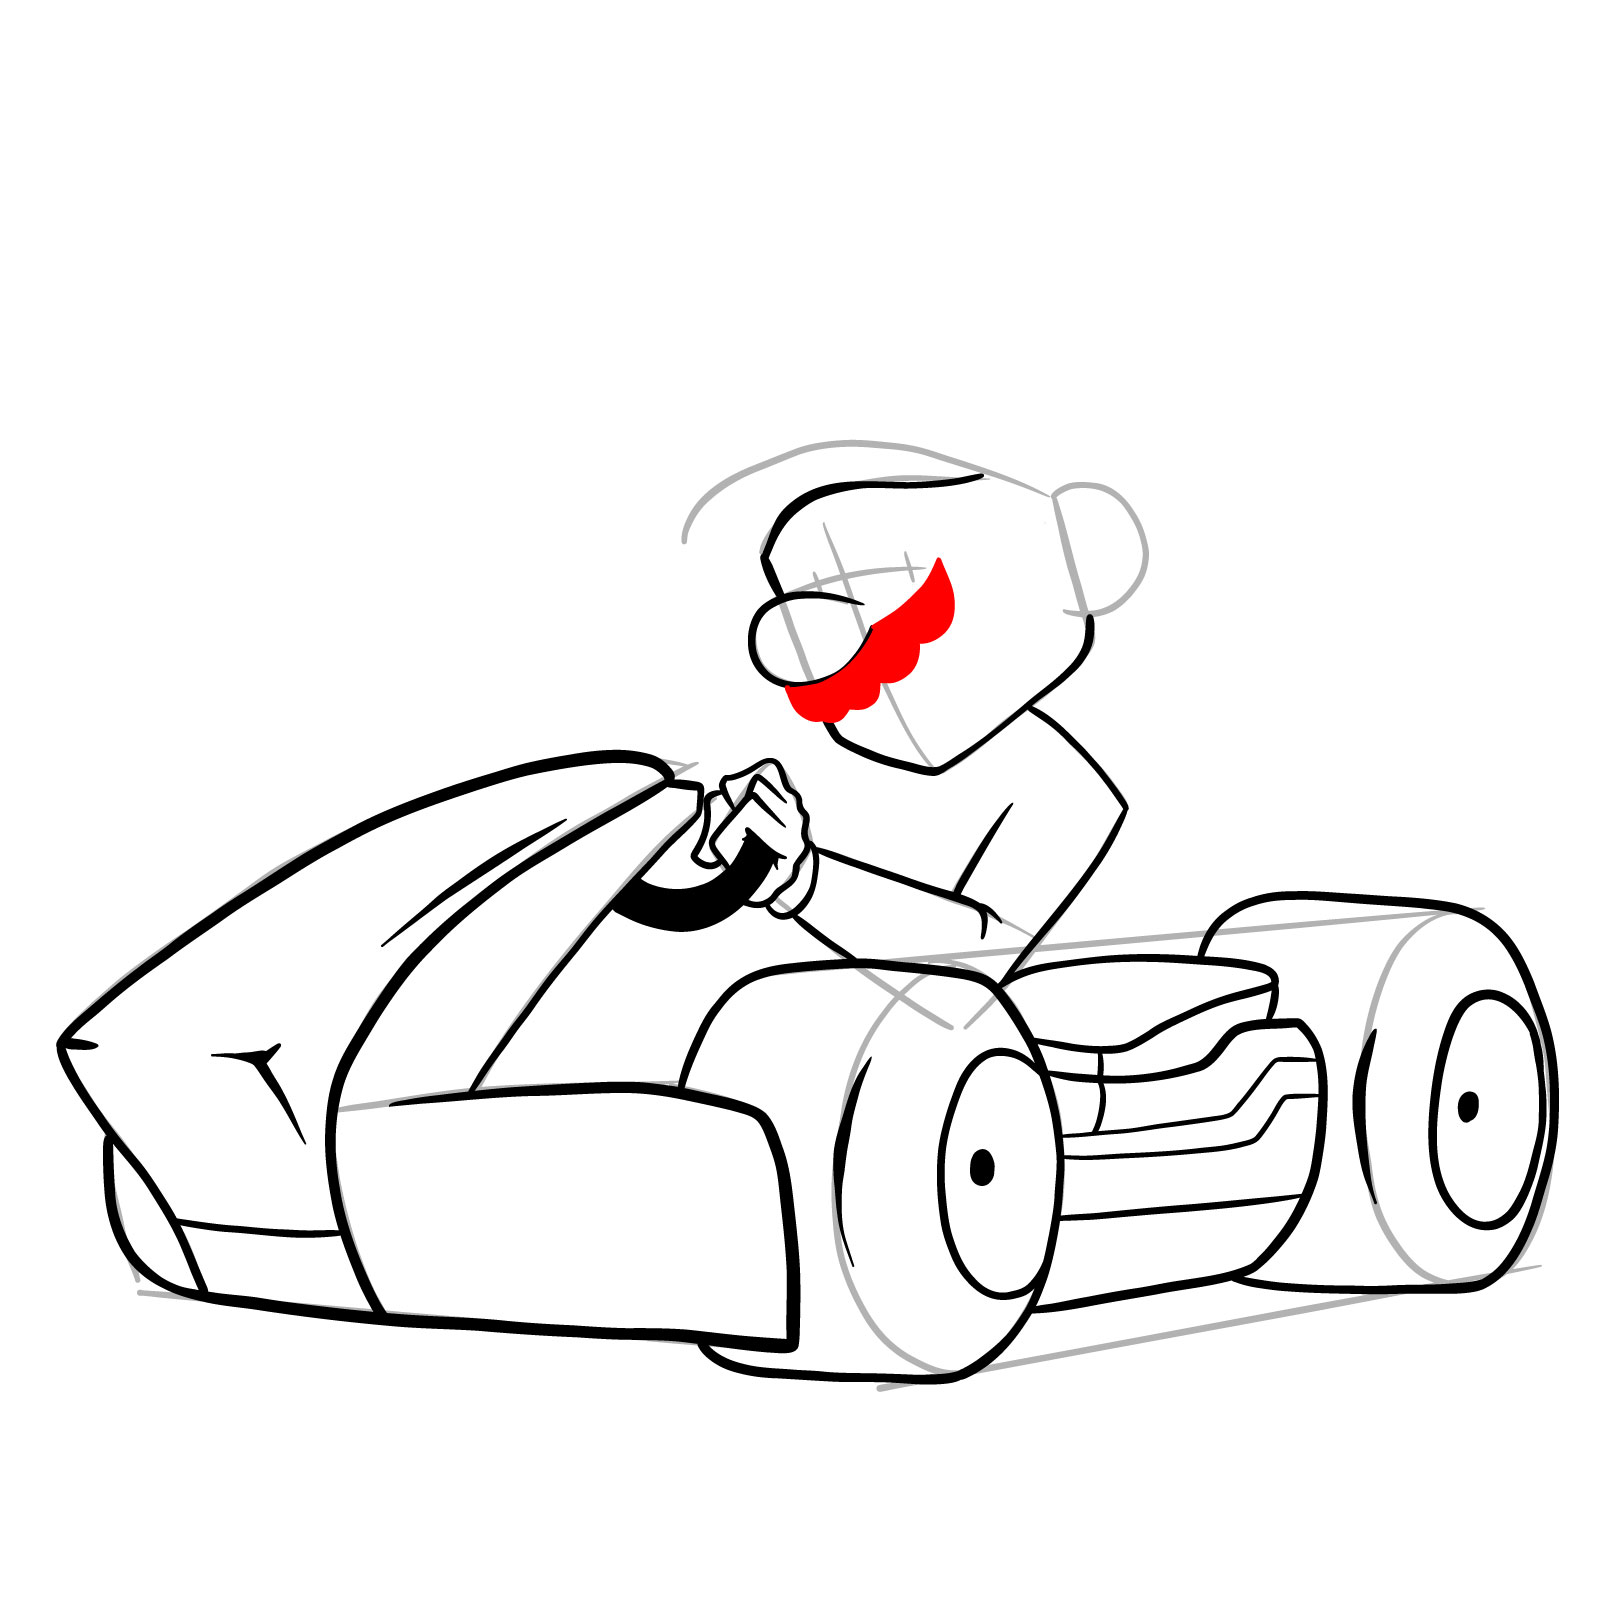 How to draw Race Traitors Mario - step 23